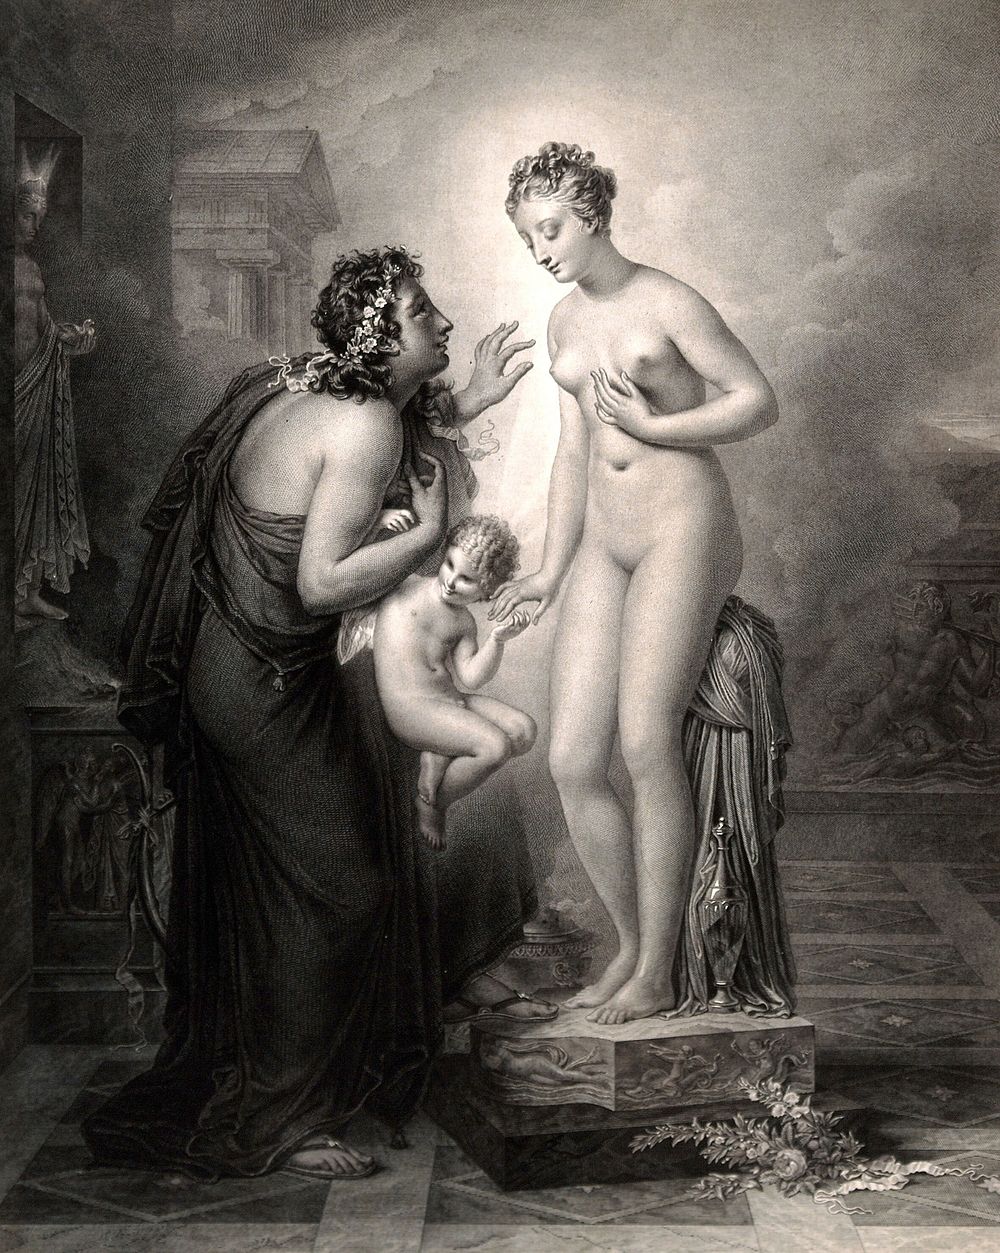 Pygmalion with his statue of a woman that comes to life. Engraving by J.N. Laugier, 1824, after A.L. Girodet-Trioson, 1819.